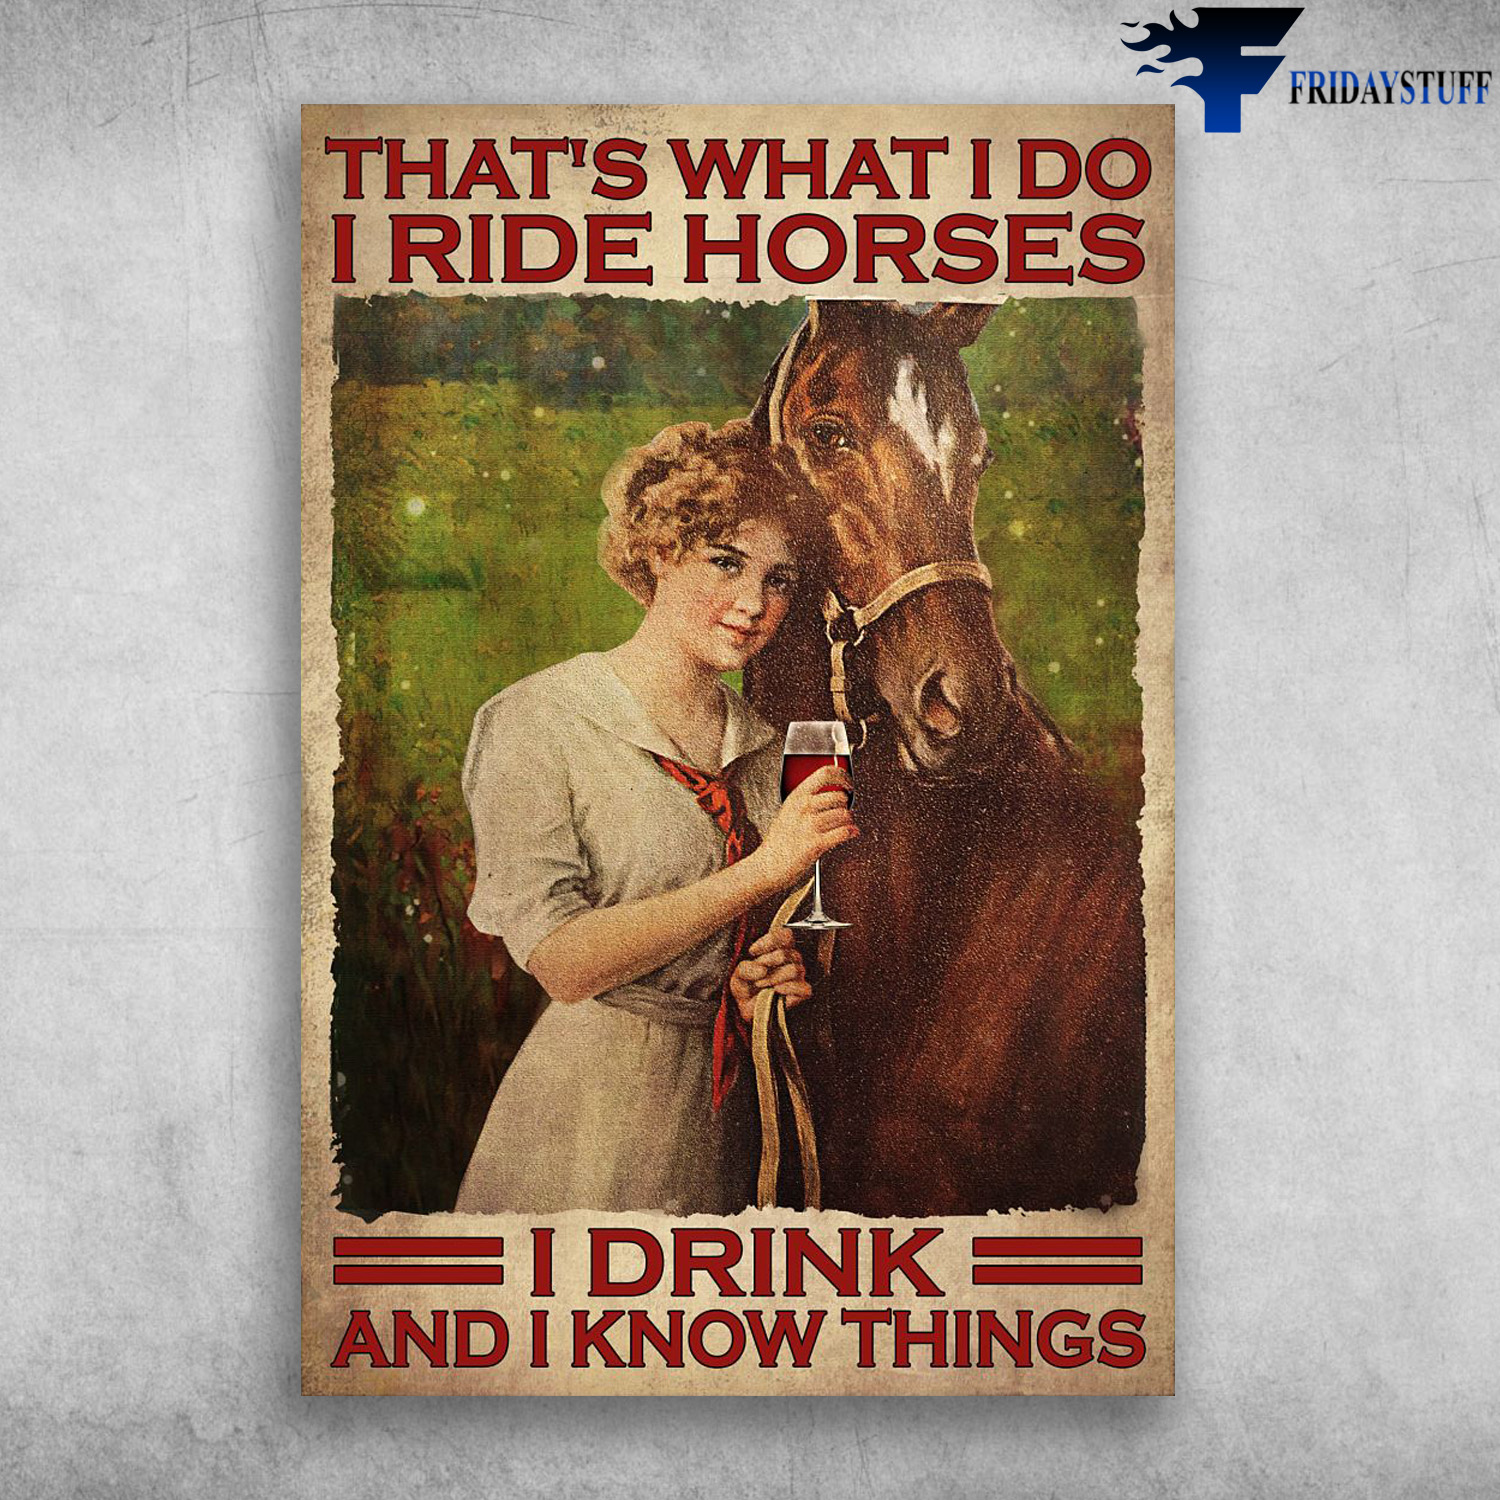 Girl Drinks Wine And Horse – That’s What I Do, I Ride Horses, I Drink, And I Know Things